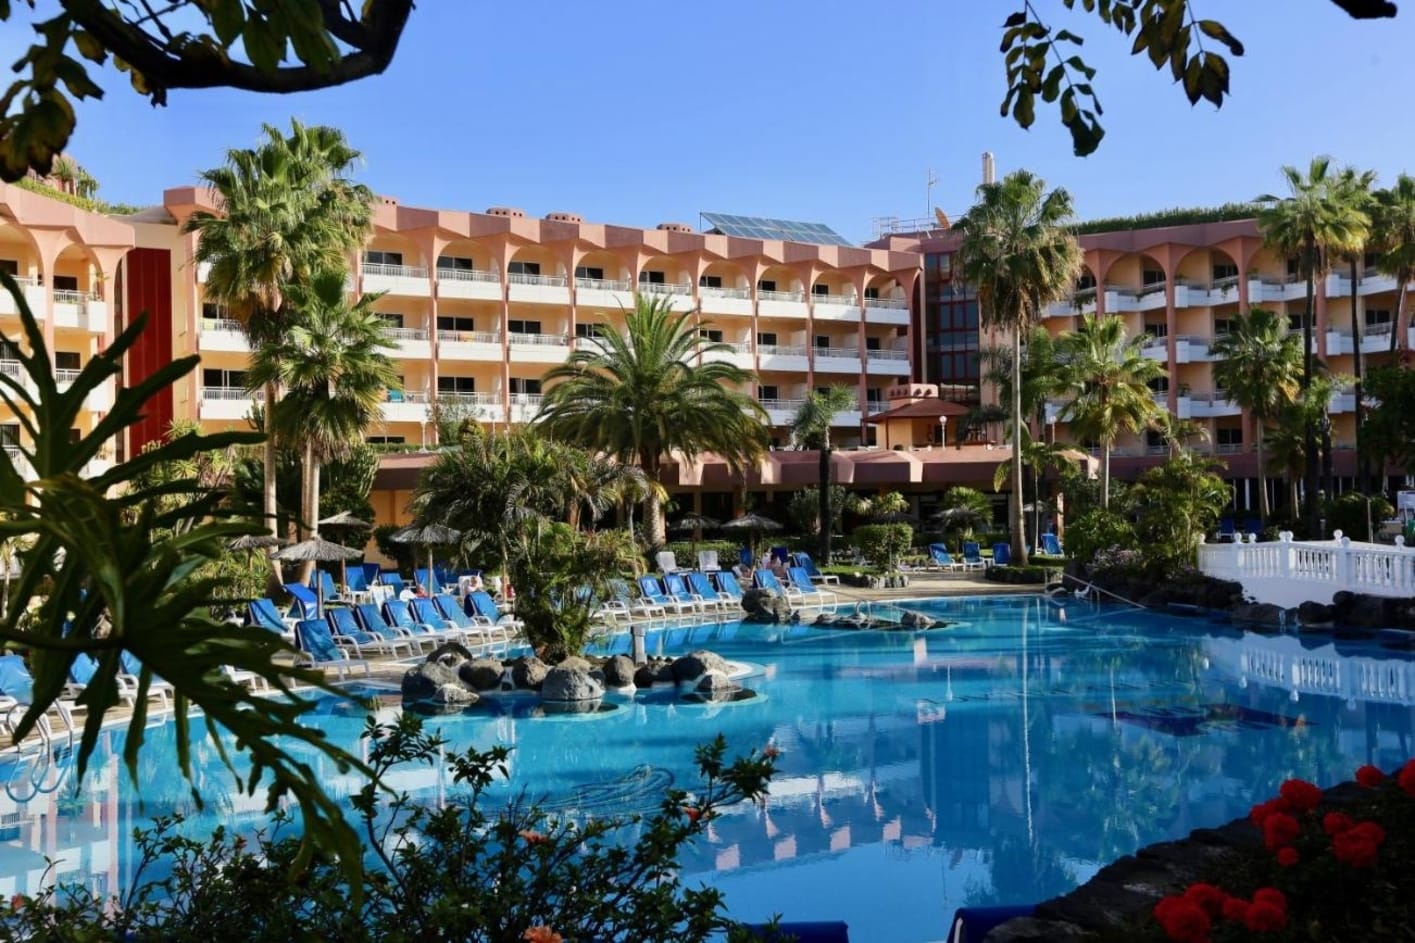 Hotel Puerto Palace, tenerife cheapest hotels